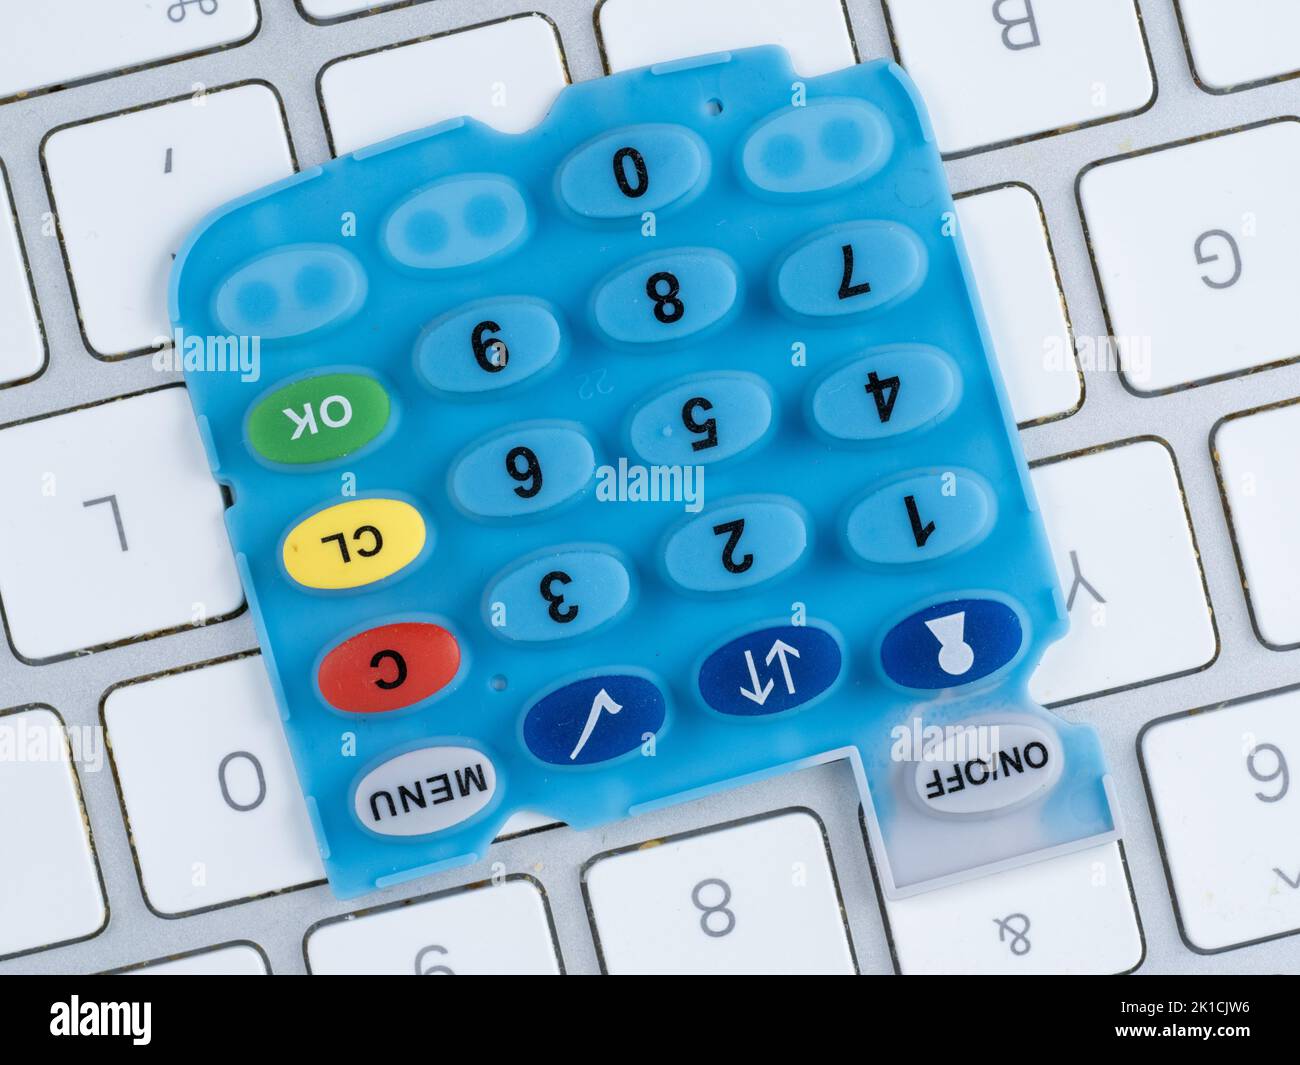 financial institution keypad on a computer keyboard Stock Photo